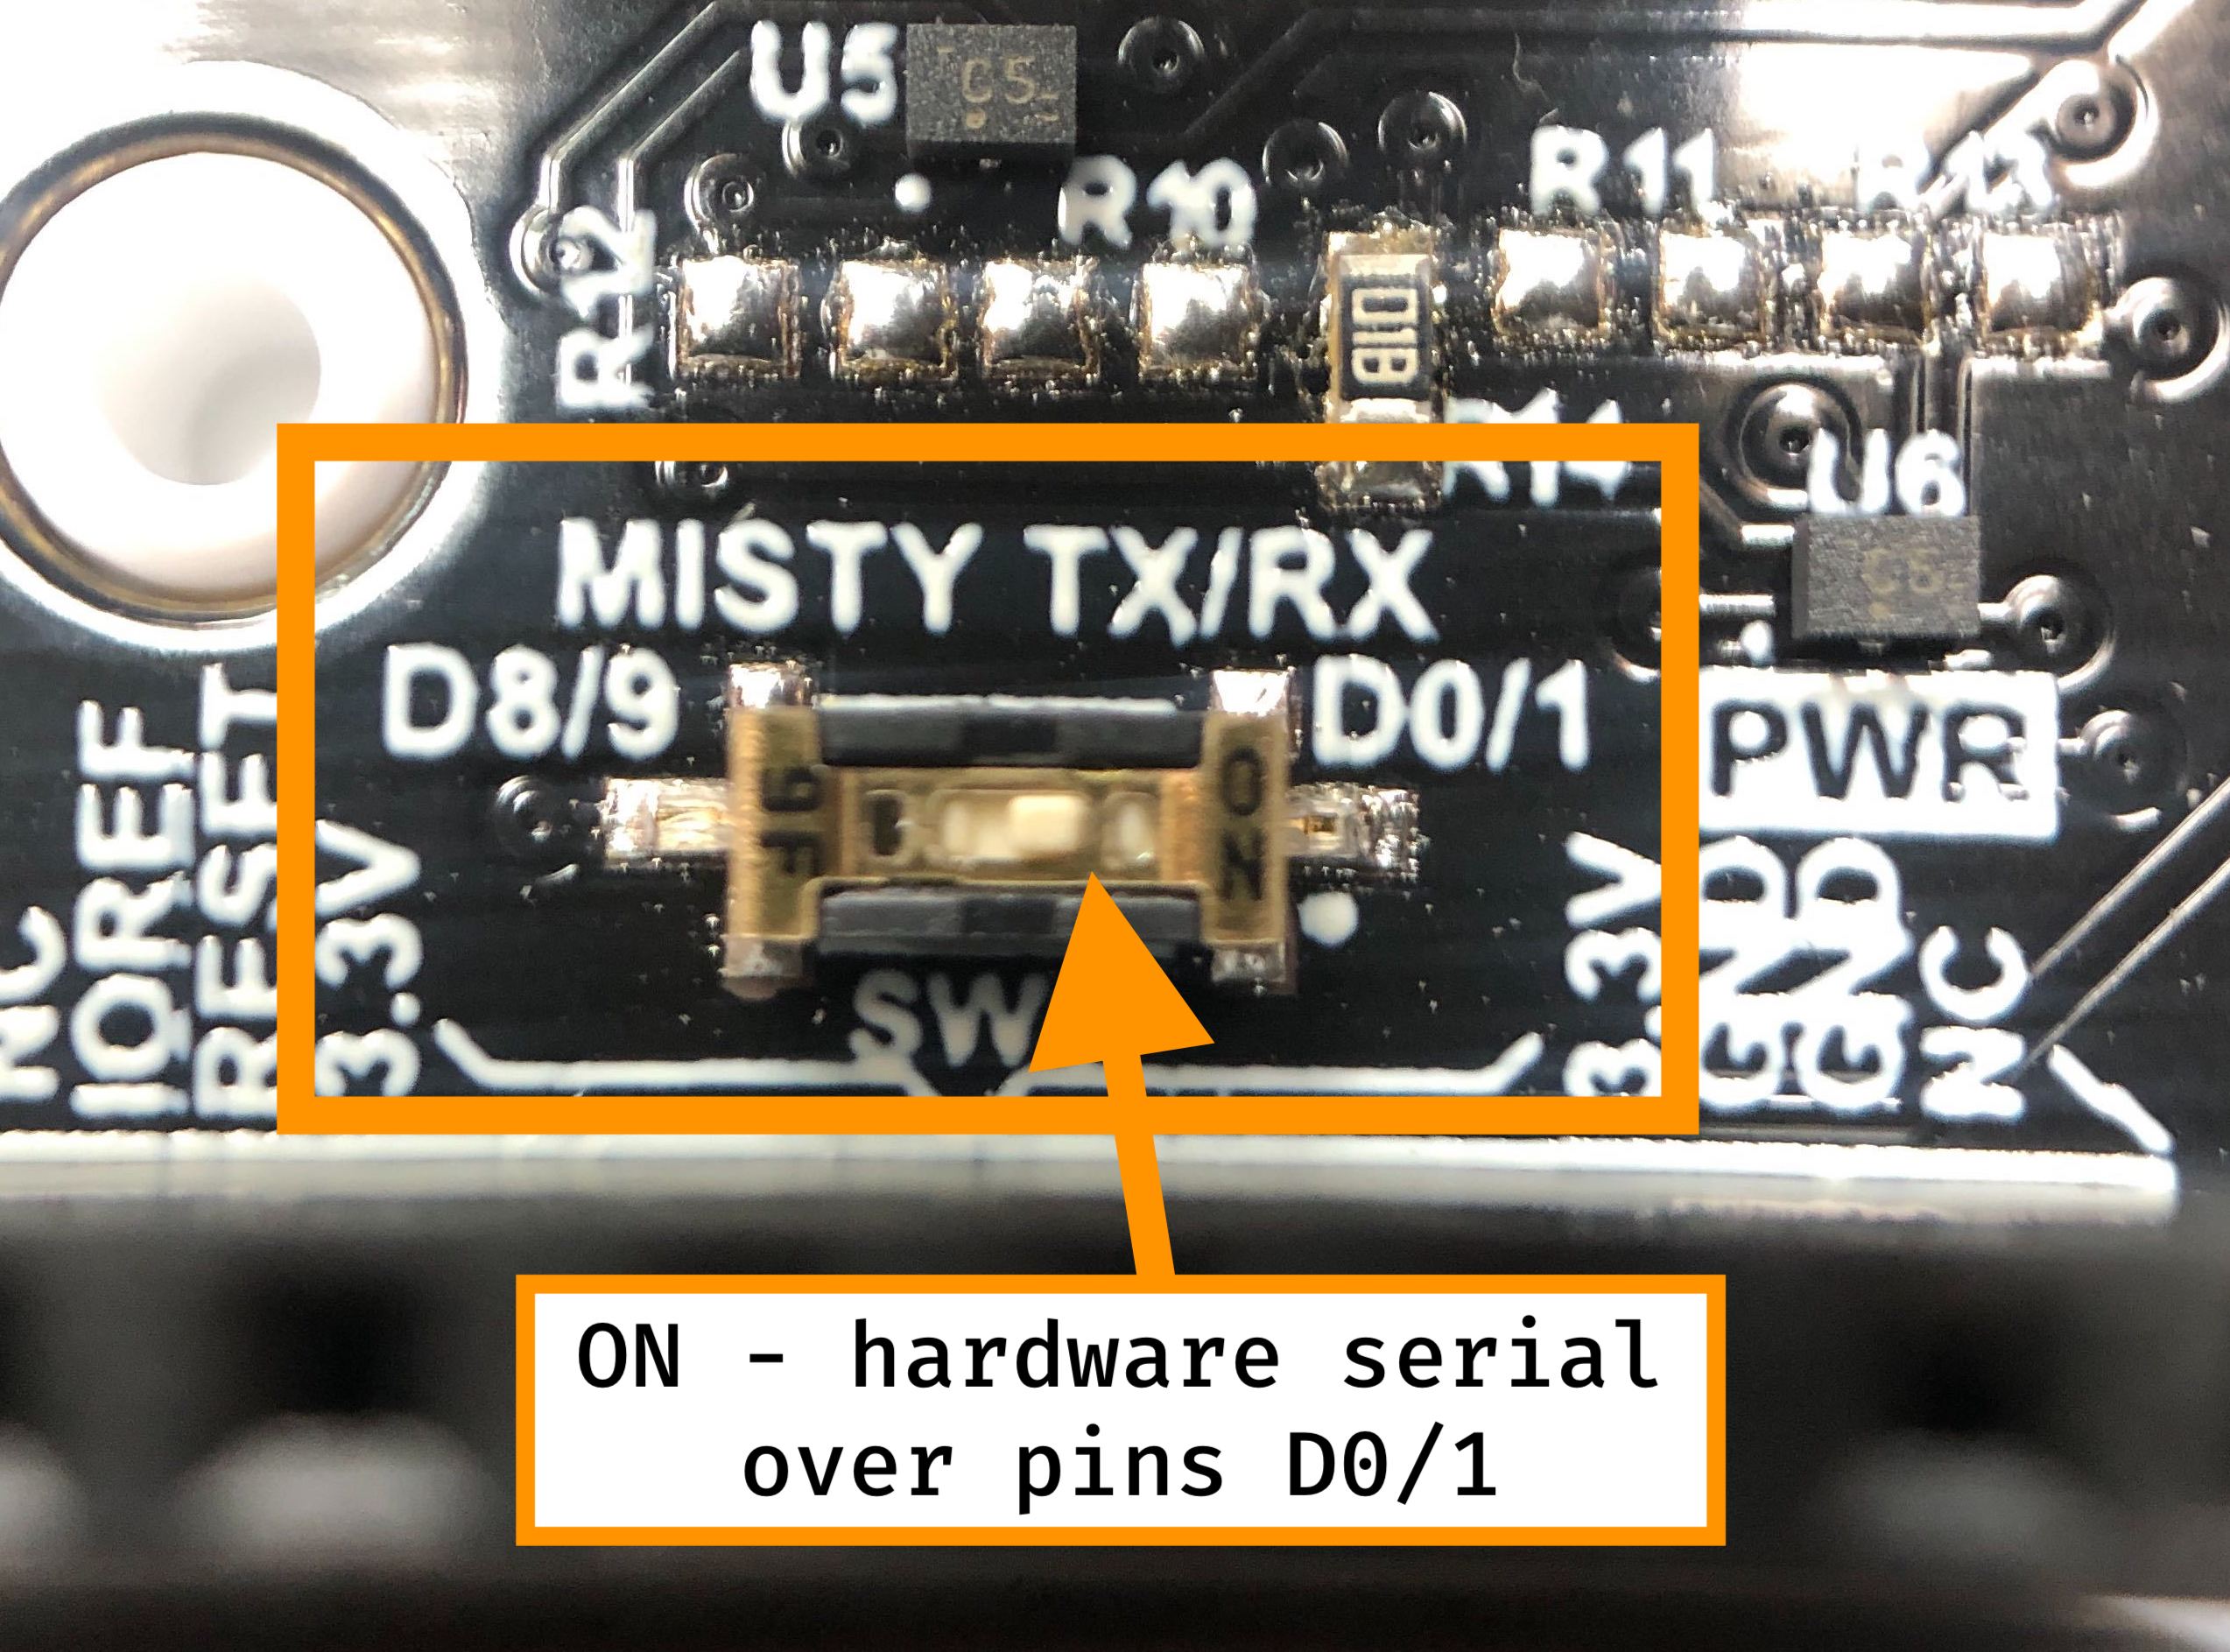 Switch set to hardware serial